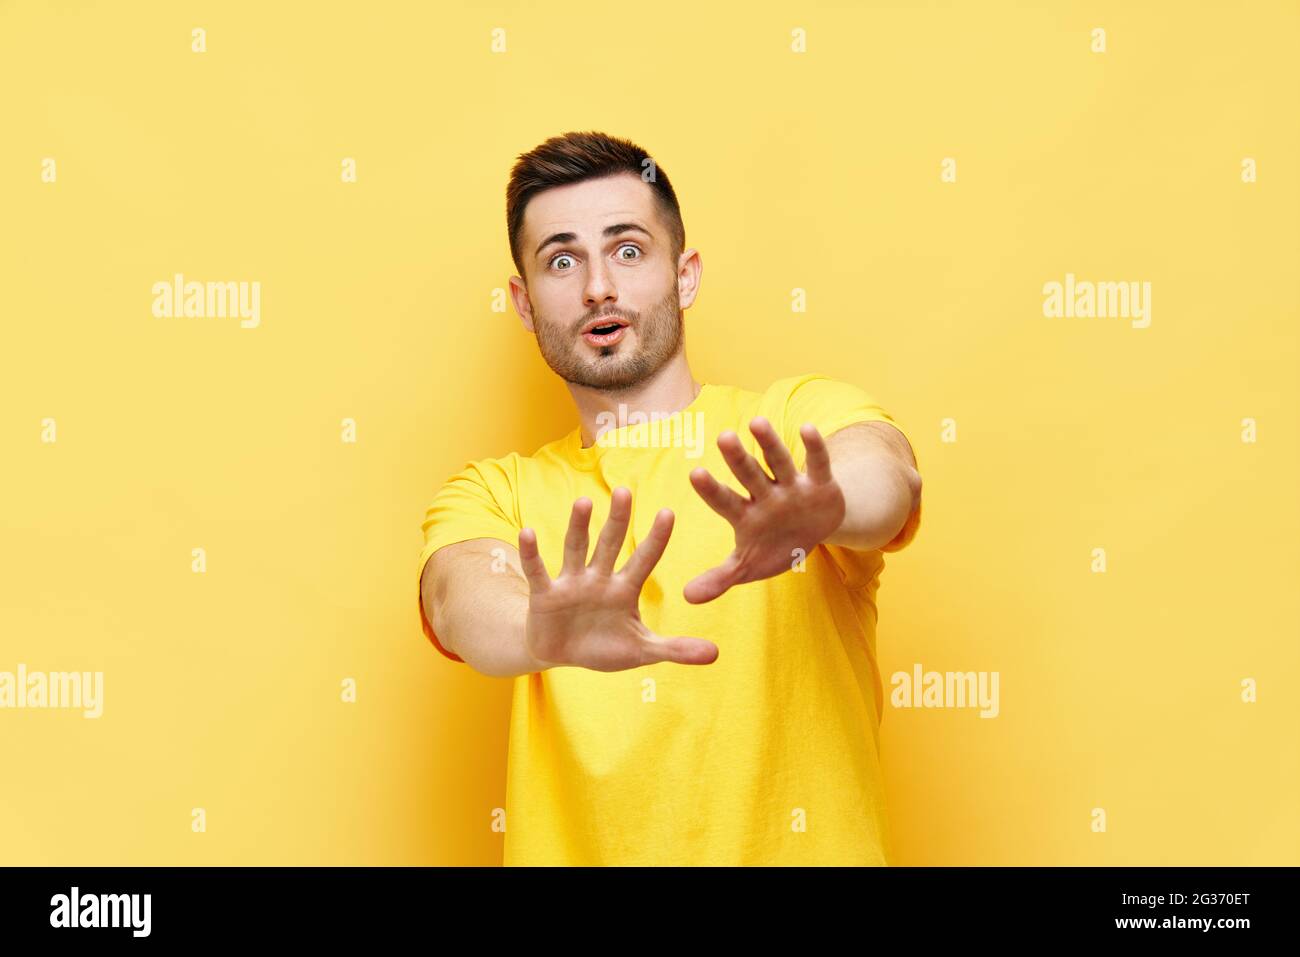 Young displeased man making stop gesture sign say no isolated on yellow background. Negative emotion, facial expression Stock Photo